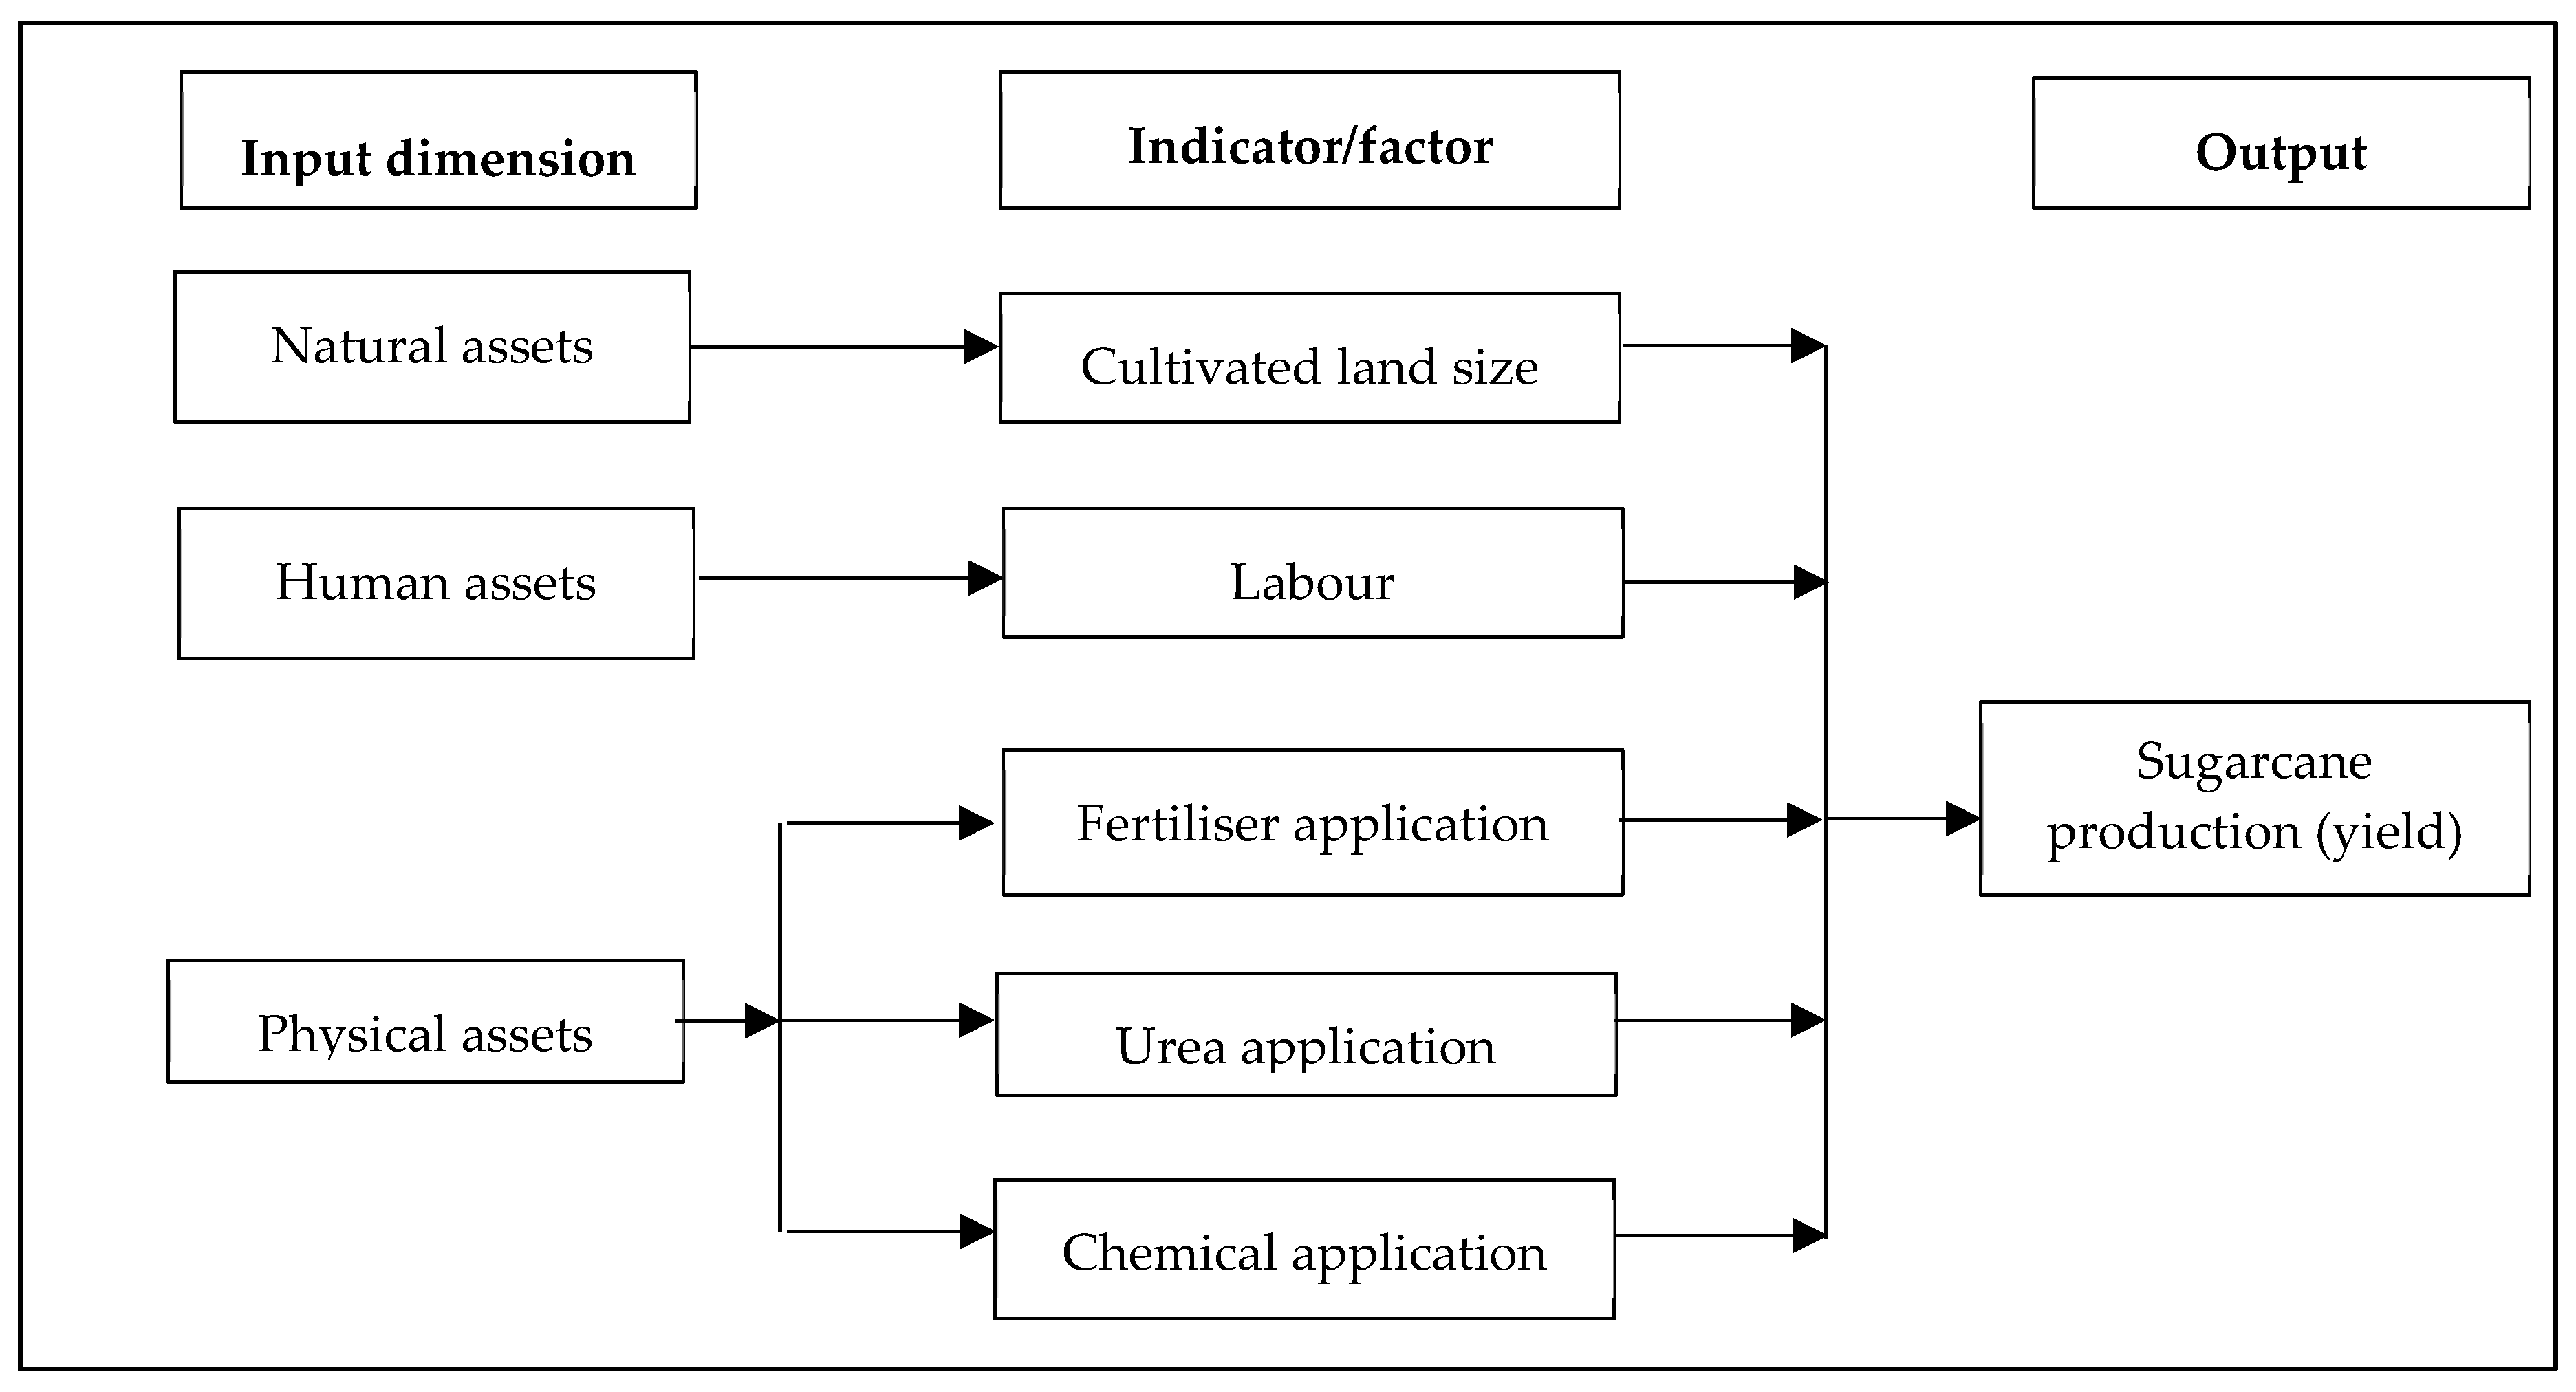 Agriculture | Free Full-Text | Factors Affecting Sugarcane Production ...